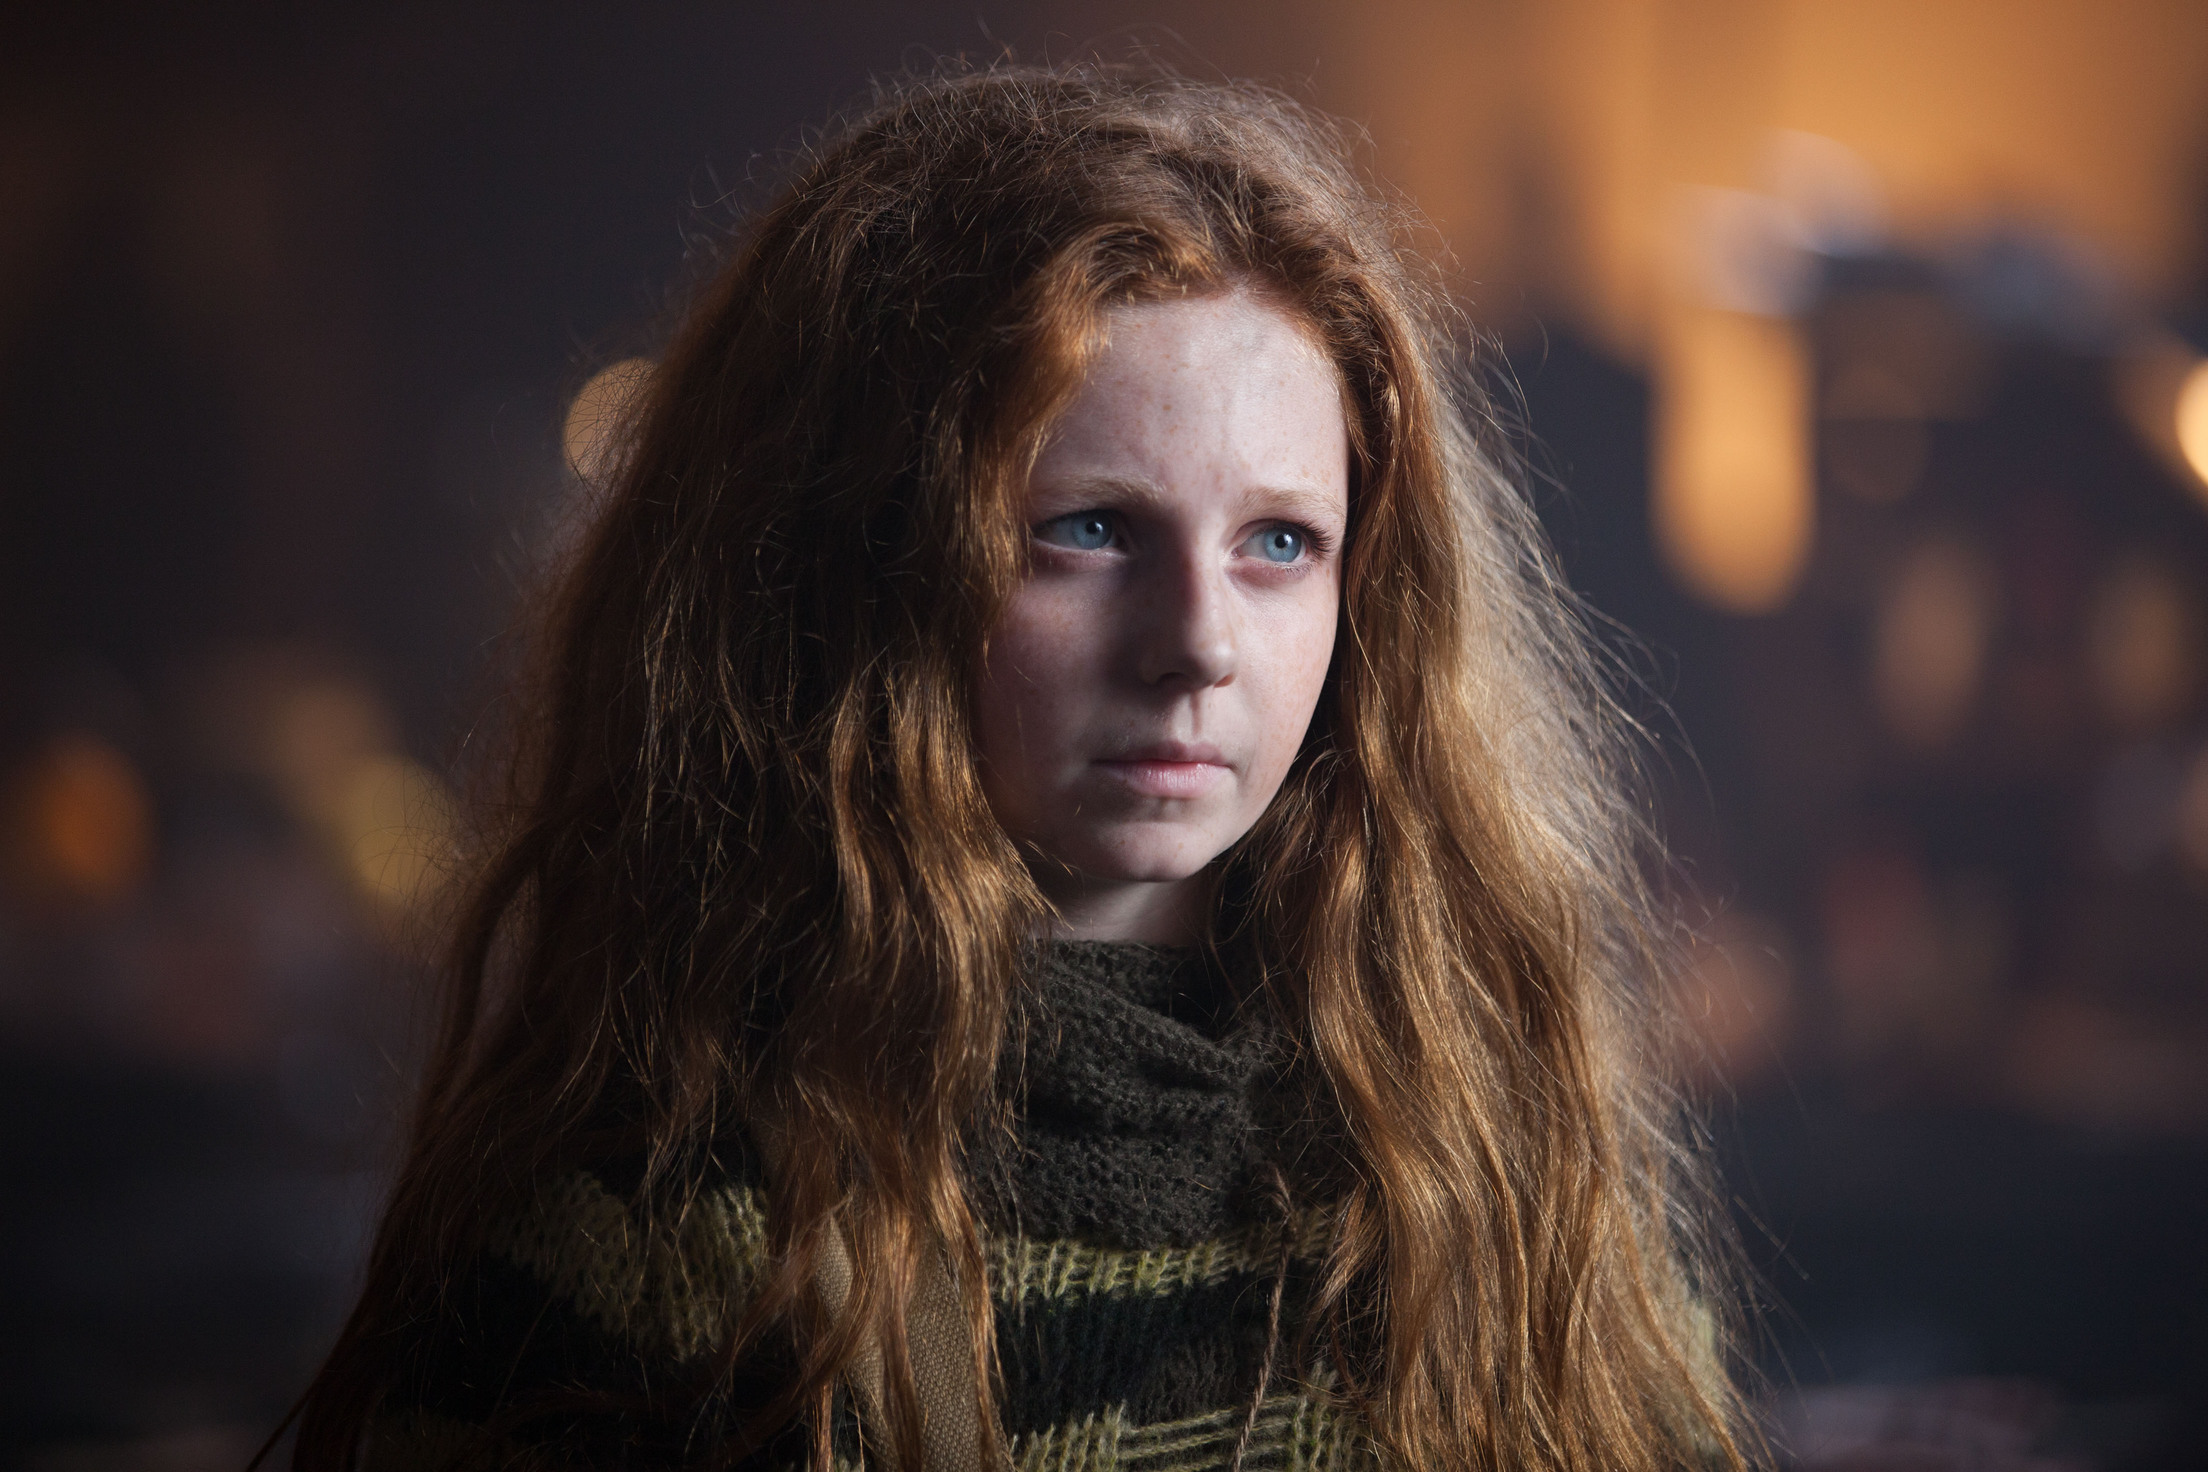 GOTHAM: Clare Foley as Ivy Pepper in the "Lovecraft" episode of GOTHAM airing Monday, Nov. 24 (8:00-9:00 PM ET/PT) on FOX. Â©2014 Fox Broadcasting Co. Cr: Jessica Miglio/FOX